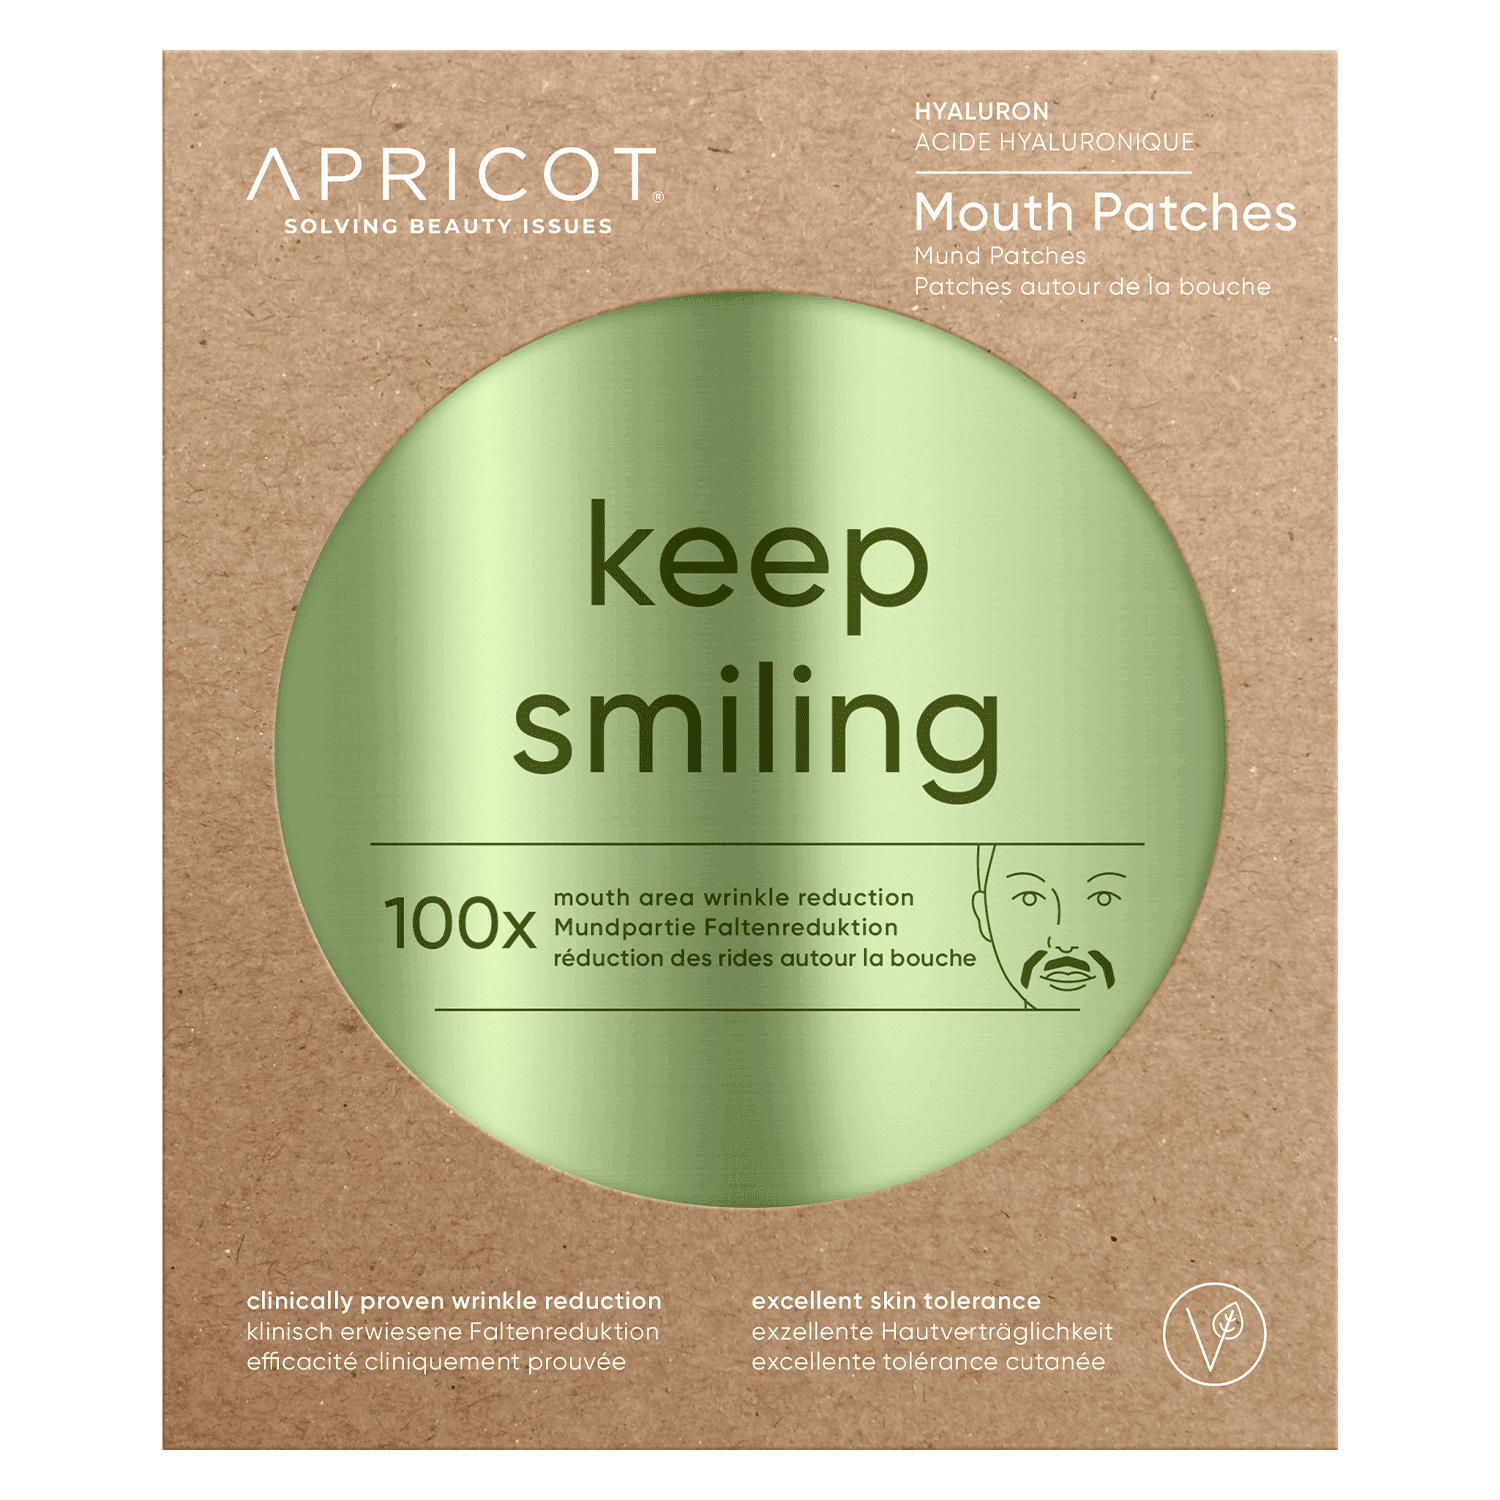 APRICOT - Mouth Patches Keep Smiling